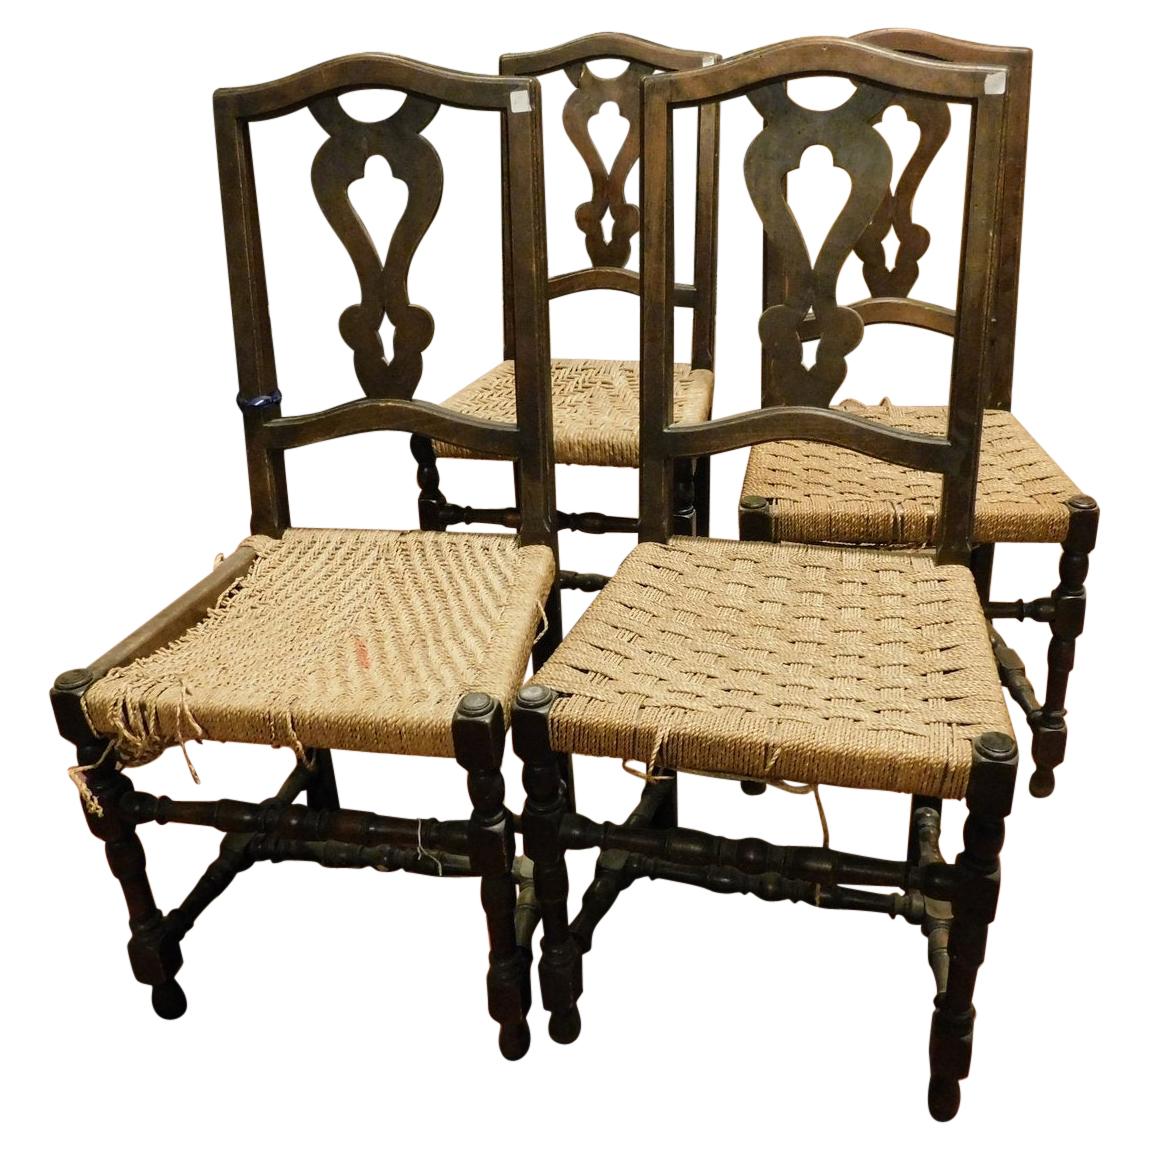 Antique Set of 6 Brown Walnut Chairs, with Woven Straw Seat, 1700, Italy